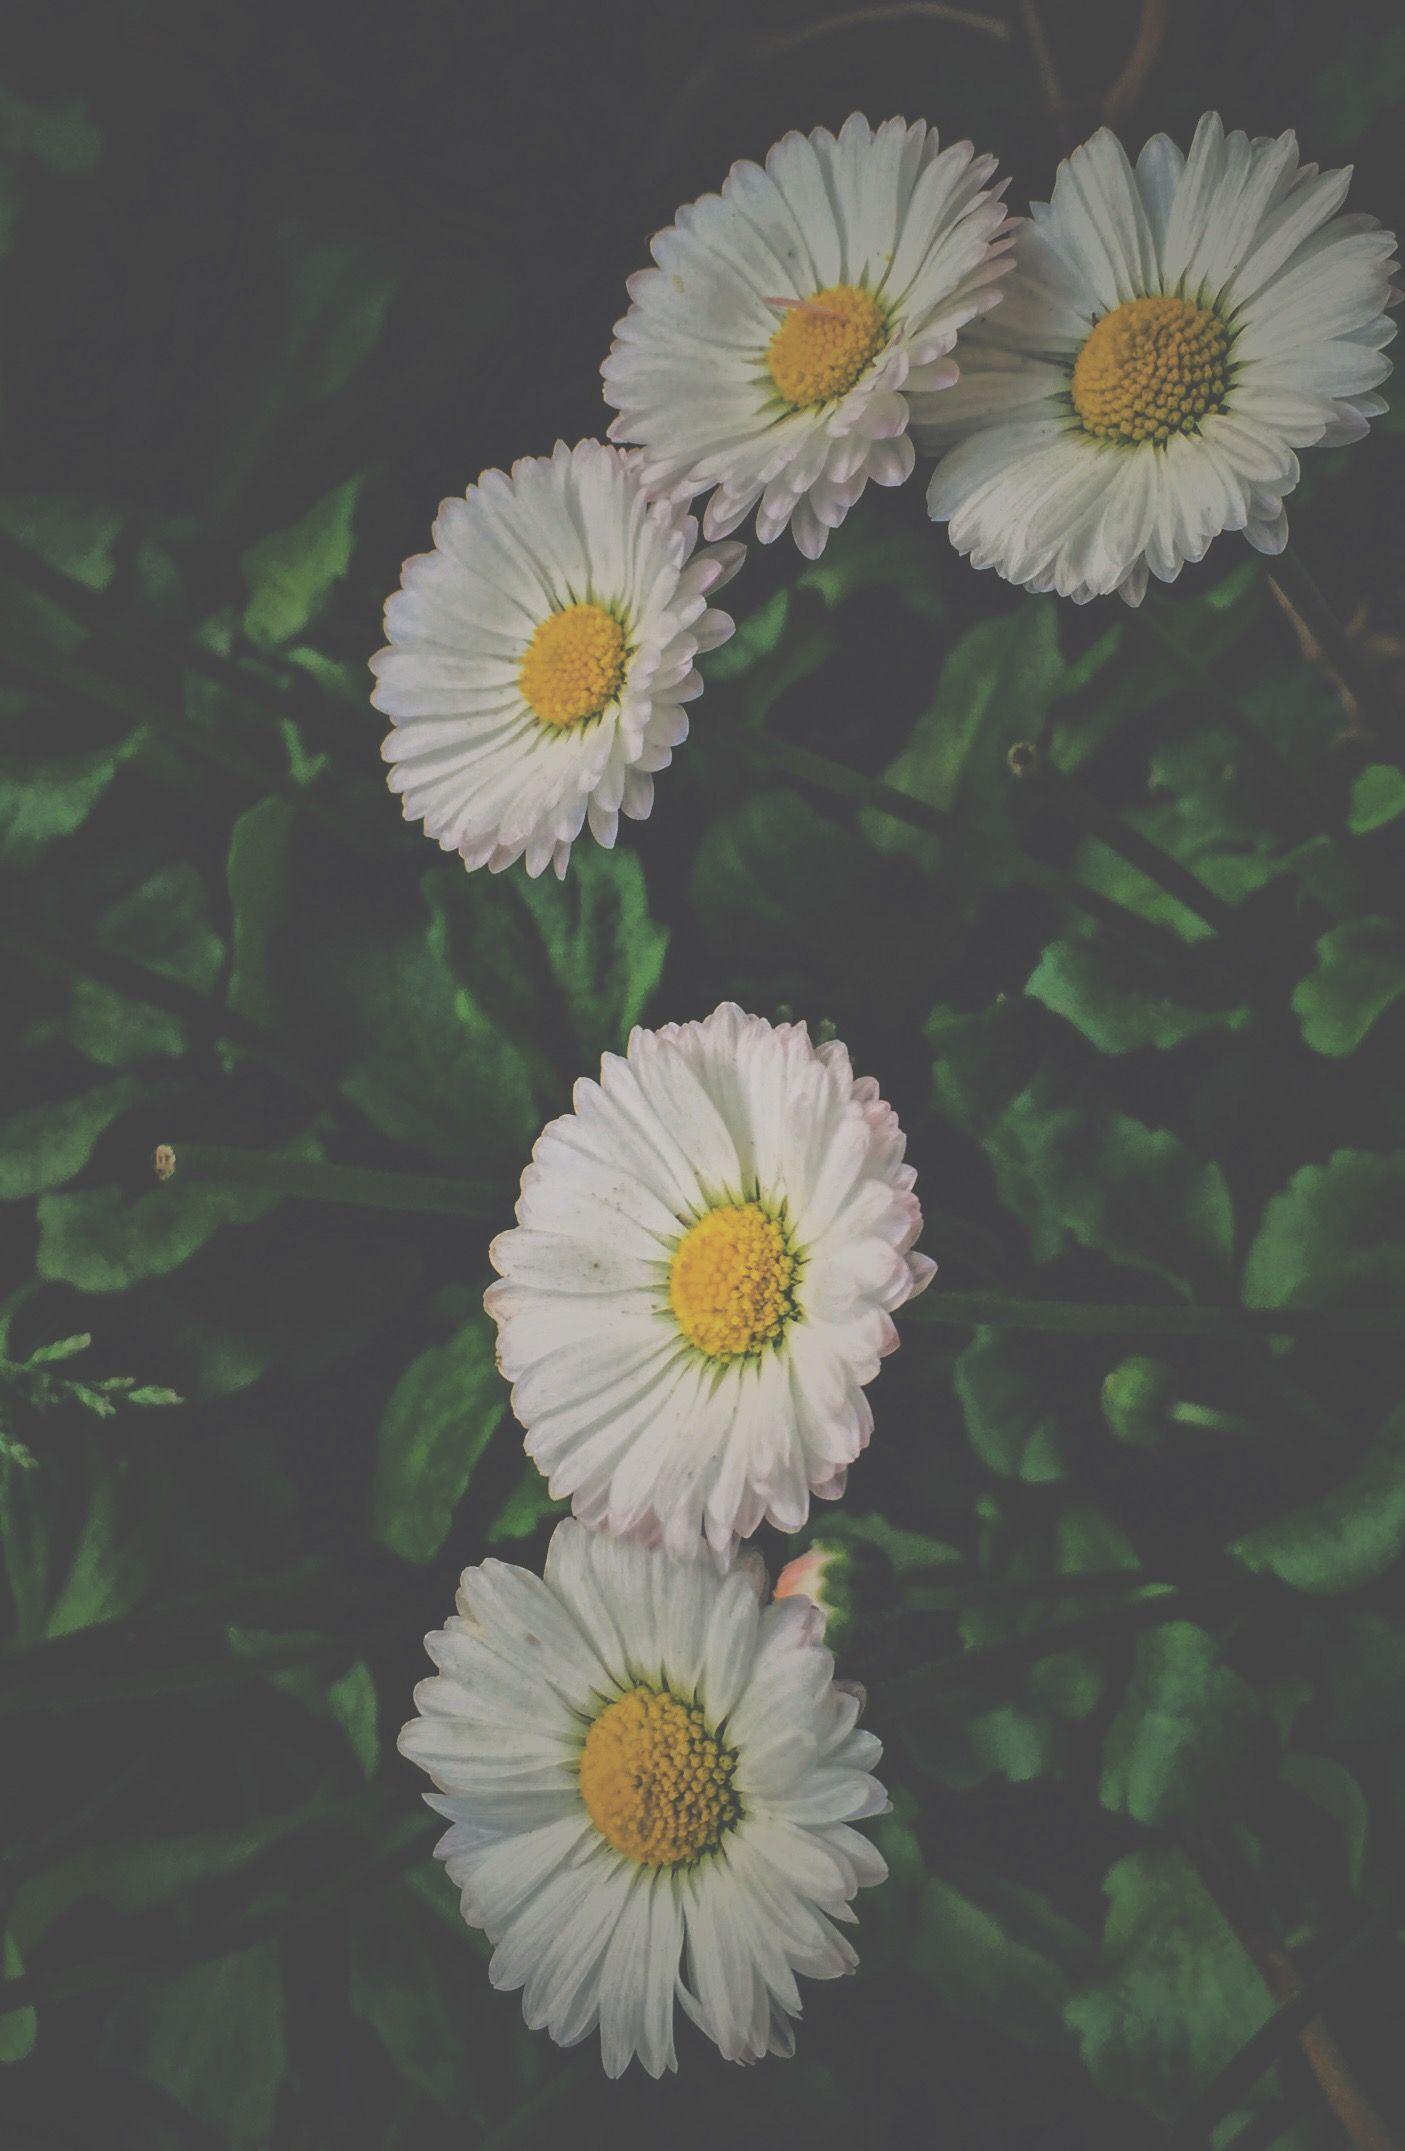 Daisy Aesthetic Wallpapers on WallpaperDog